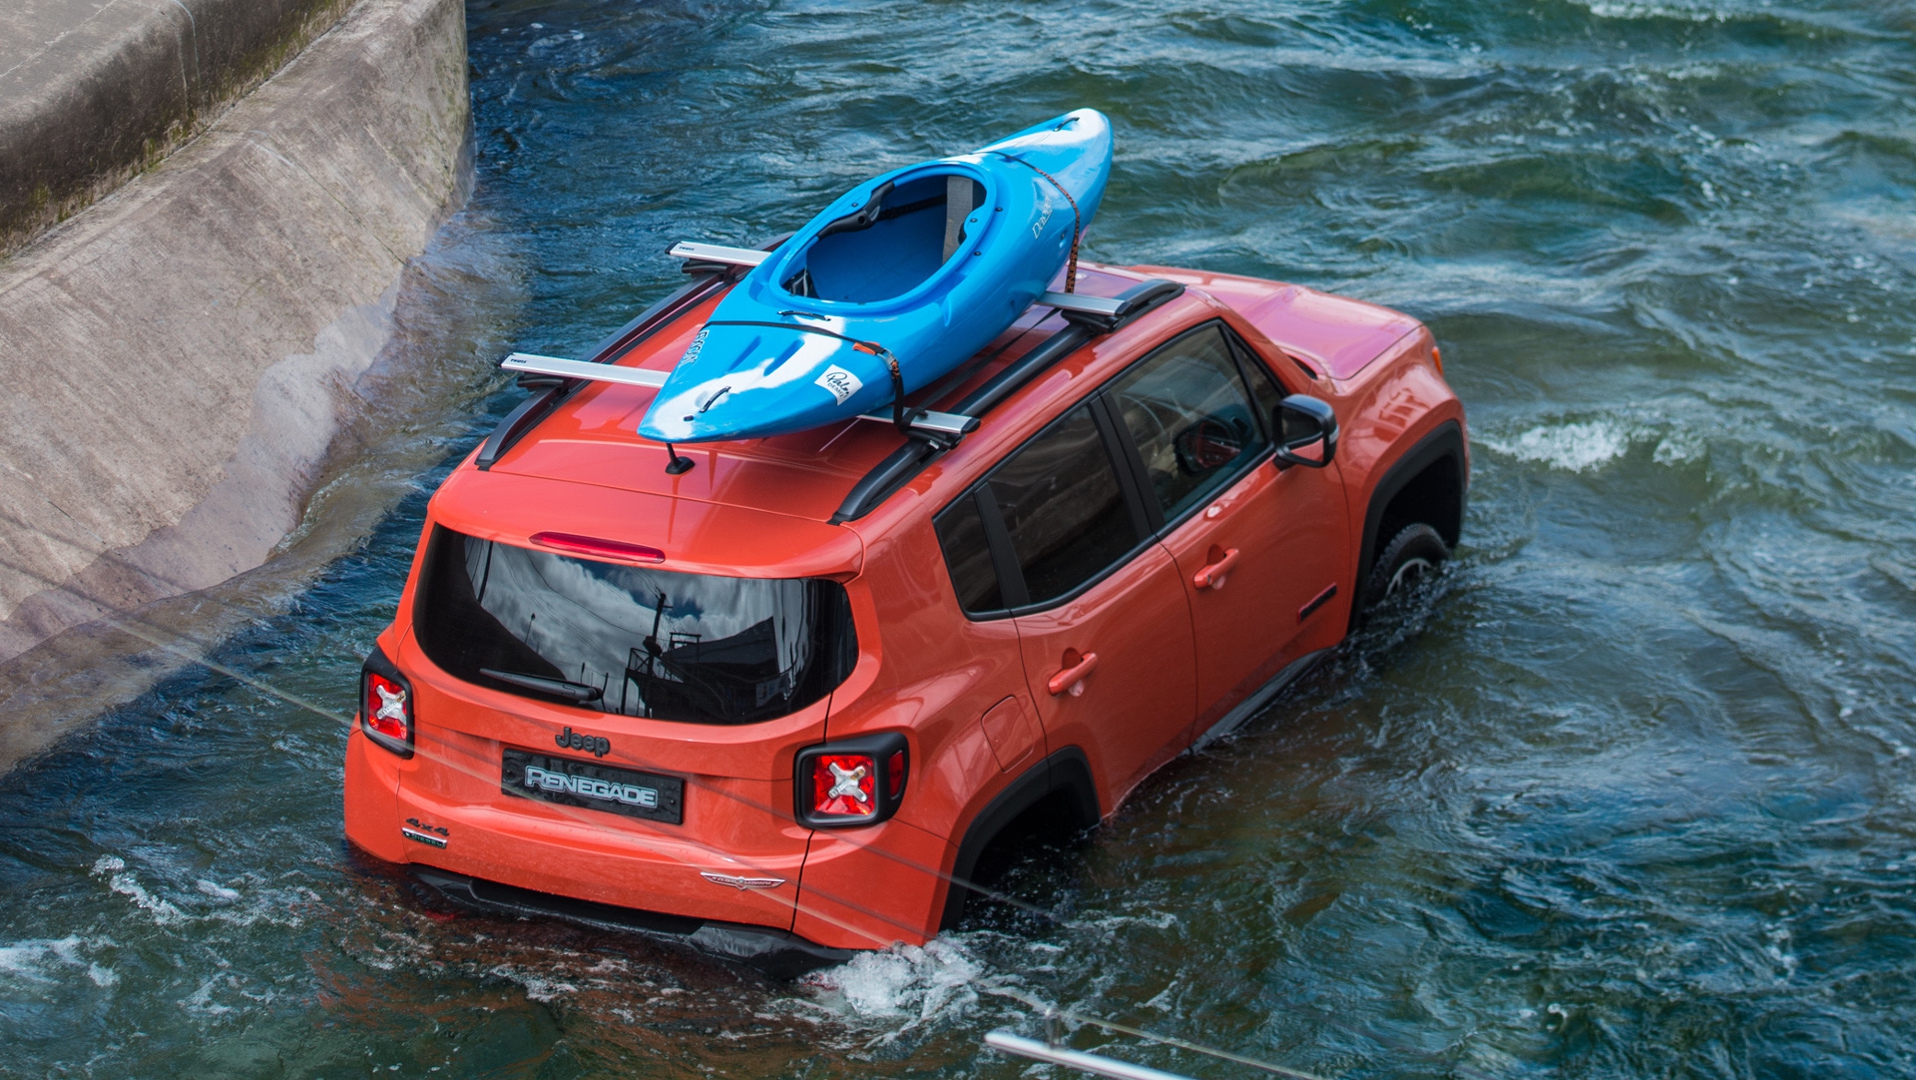 jeep-renegade-drives-white-water-rafting-course (3).jpg